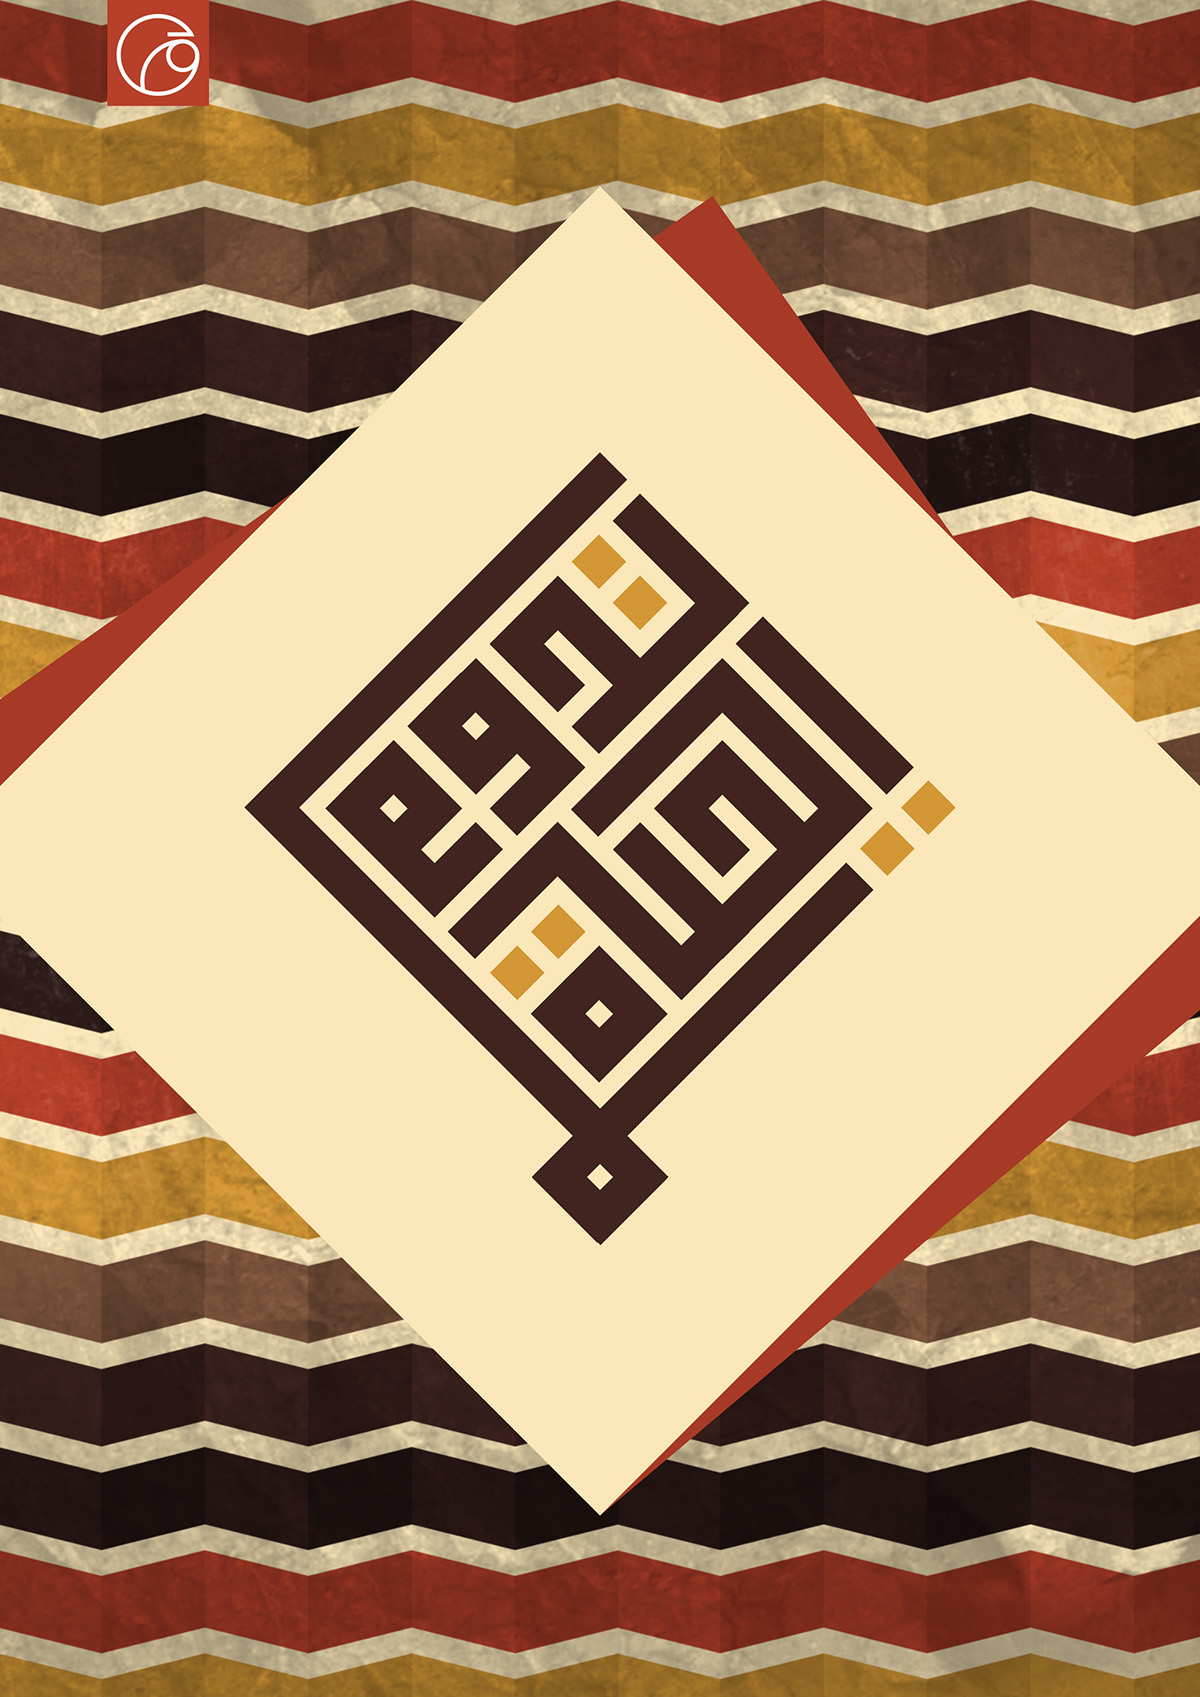 #cartoon #Ilustration #typography #Calligraphy #DigitalPainting #african #brown #palette vector